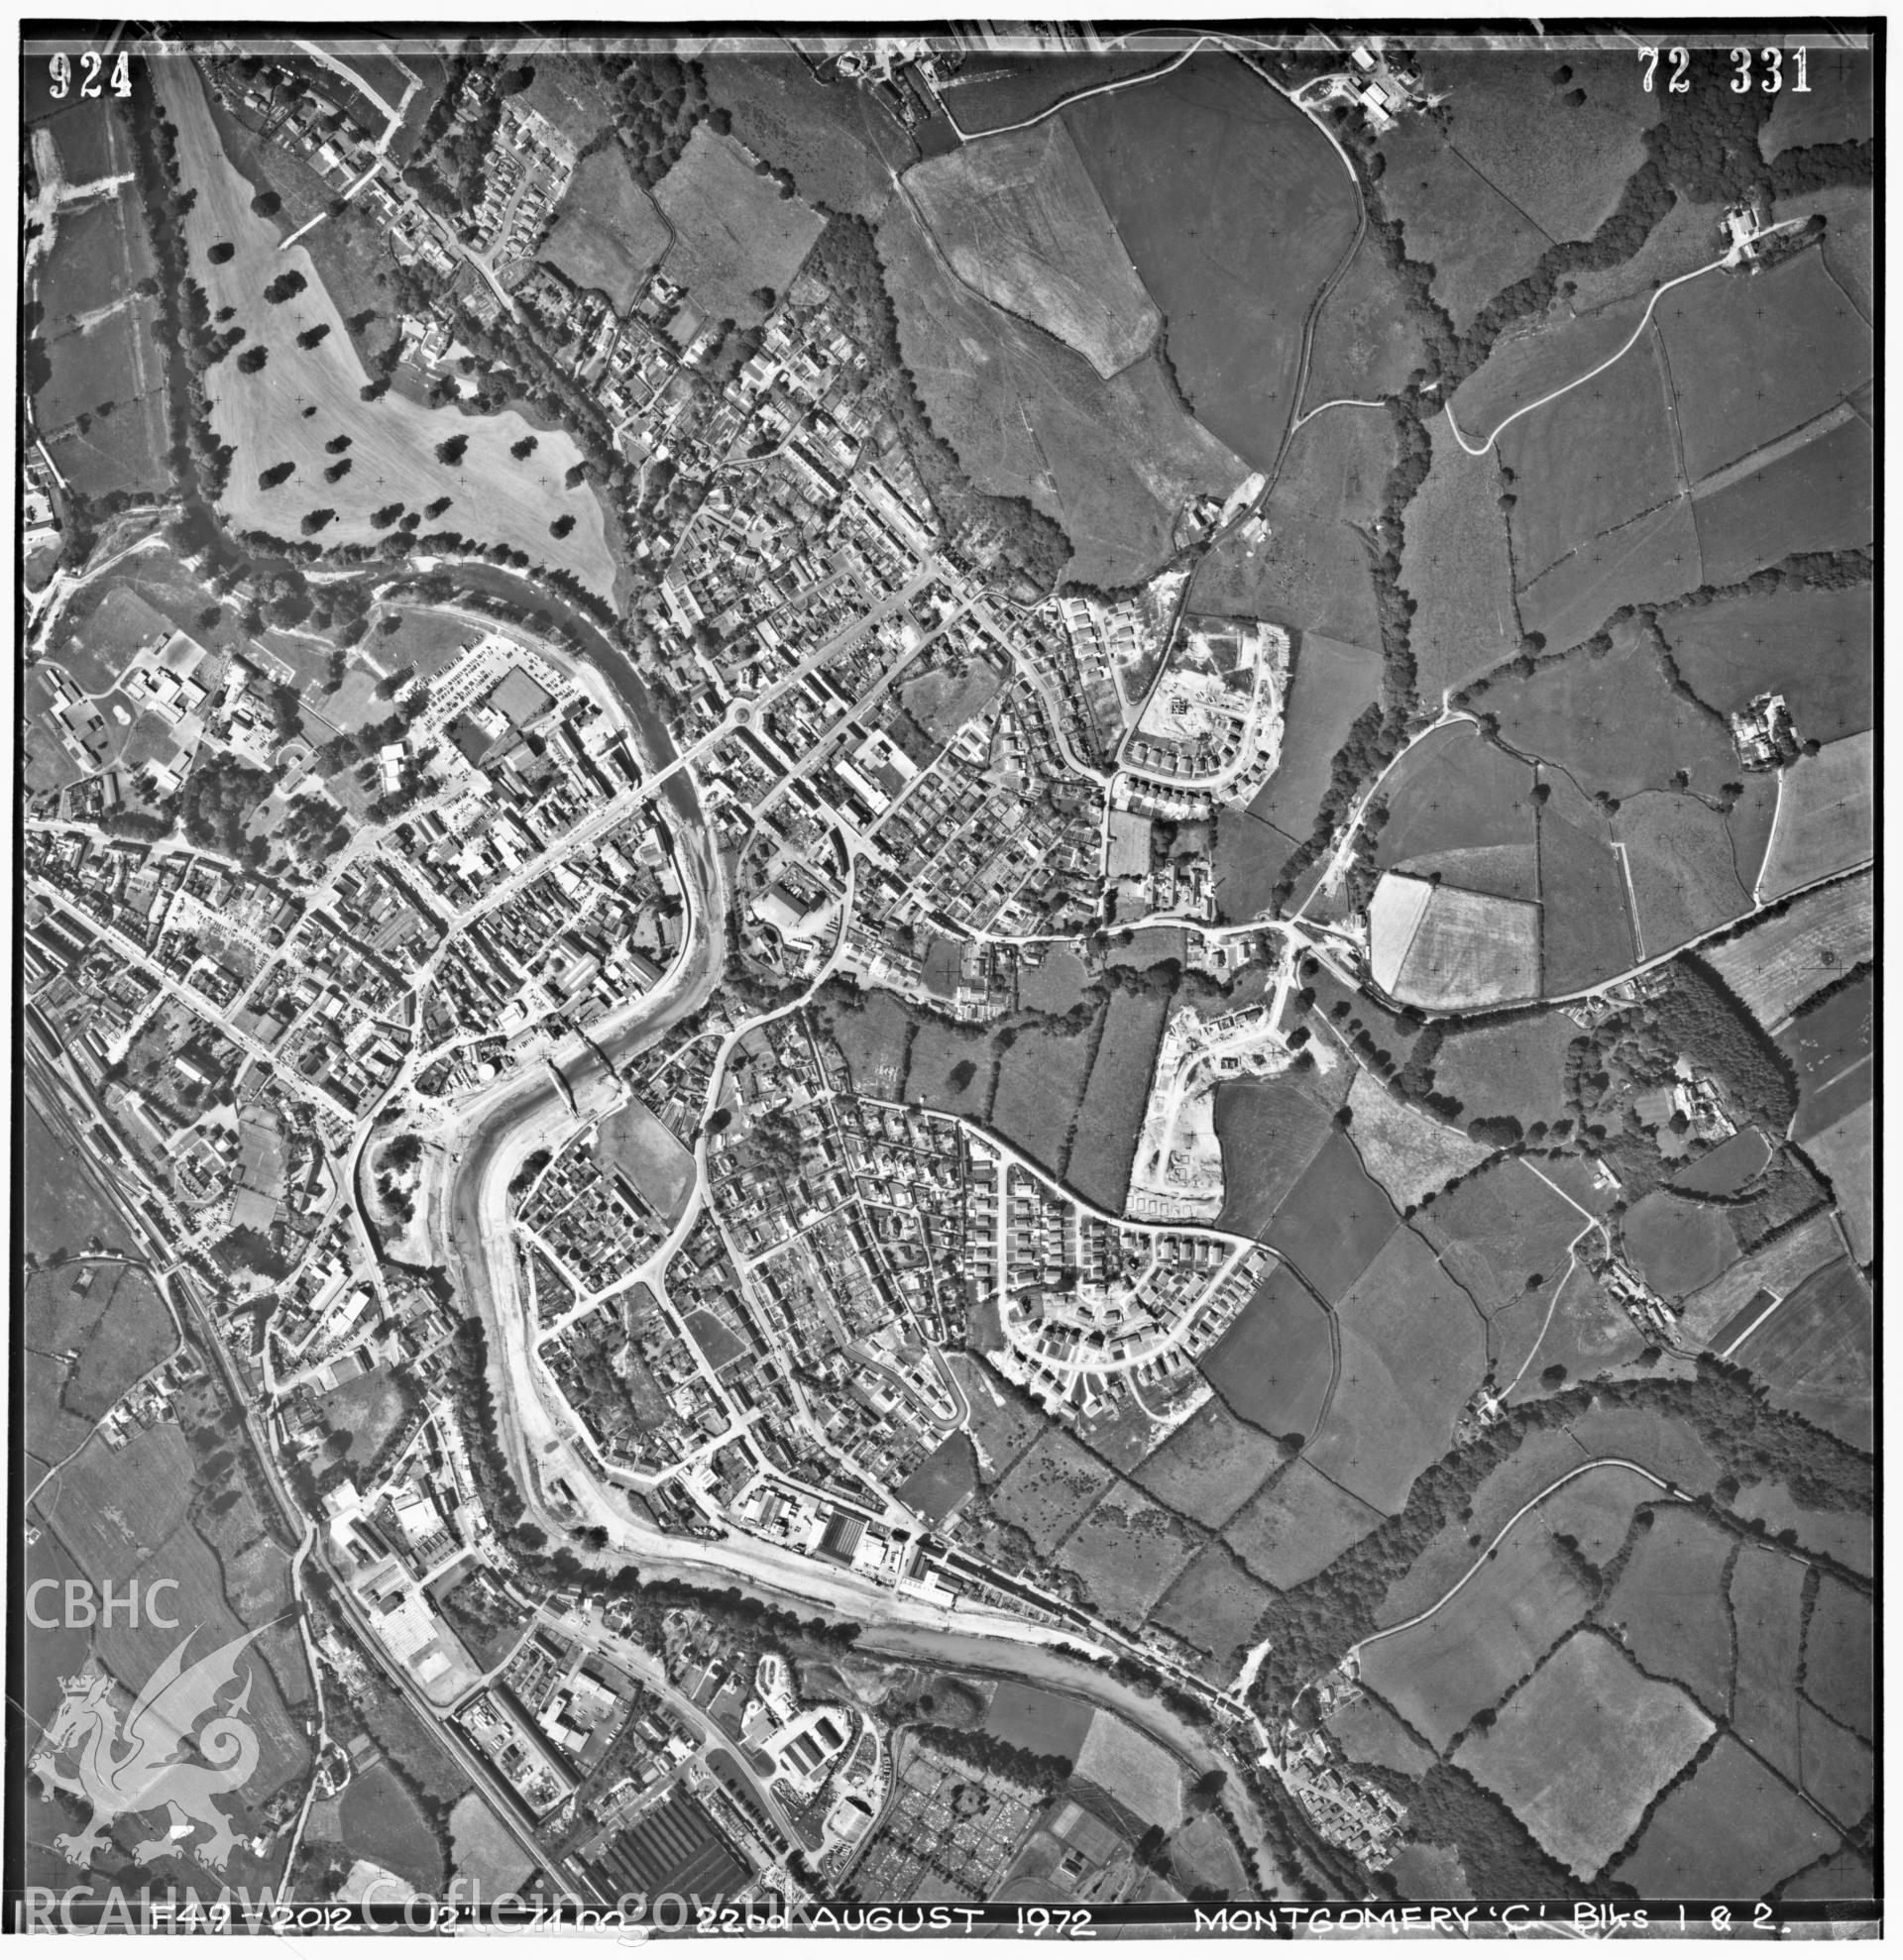 Digitized copy of an aerial photograph showing the area around Newtown, taken by Ordnance Survey, 1972.